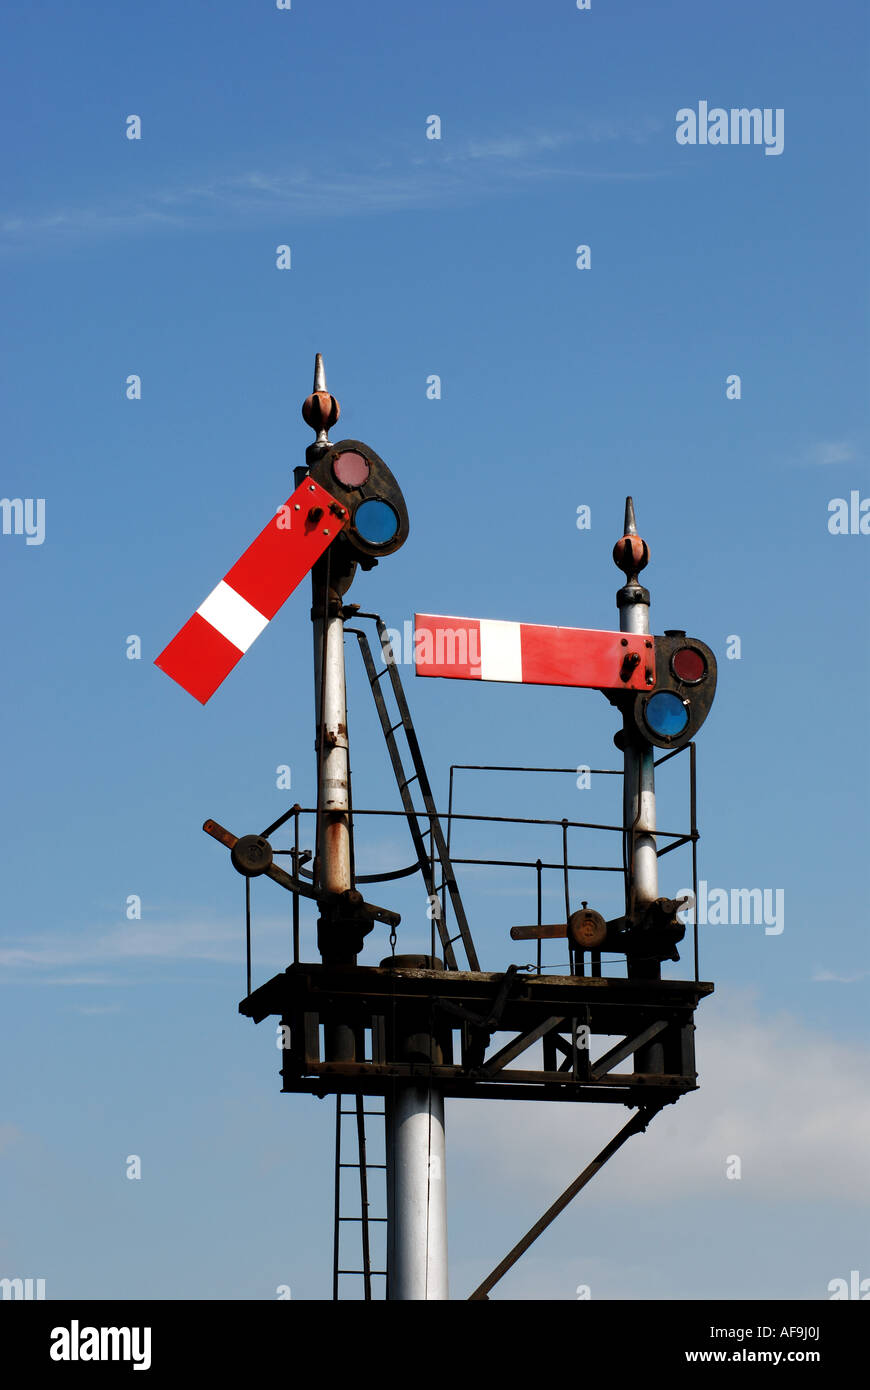 Railway semaphore signals at Droitwich Spa, Worcestershire, England, UK Stock Photo